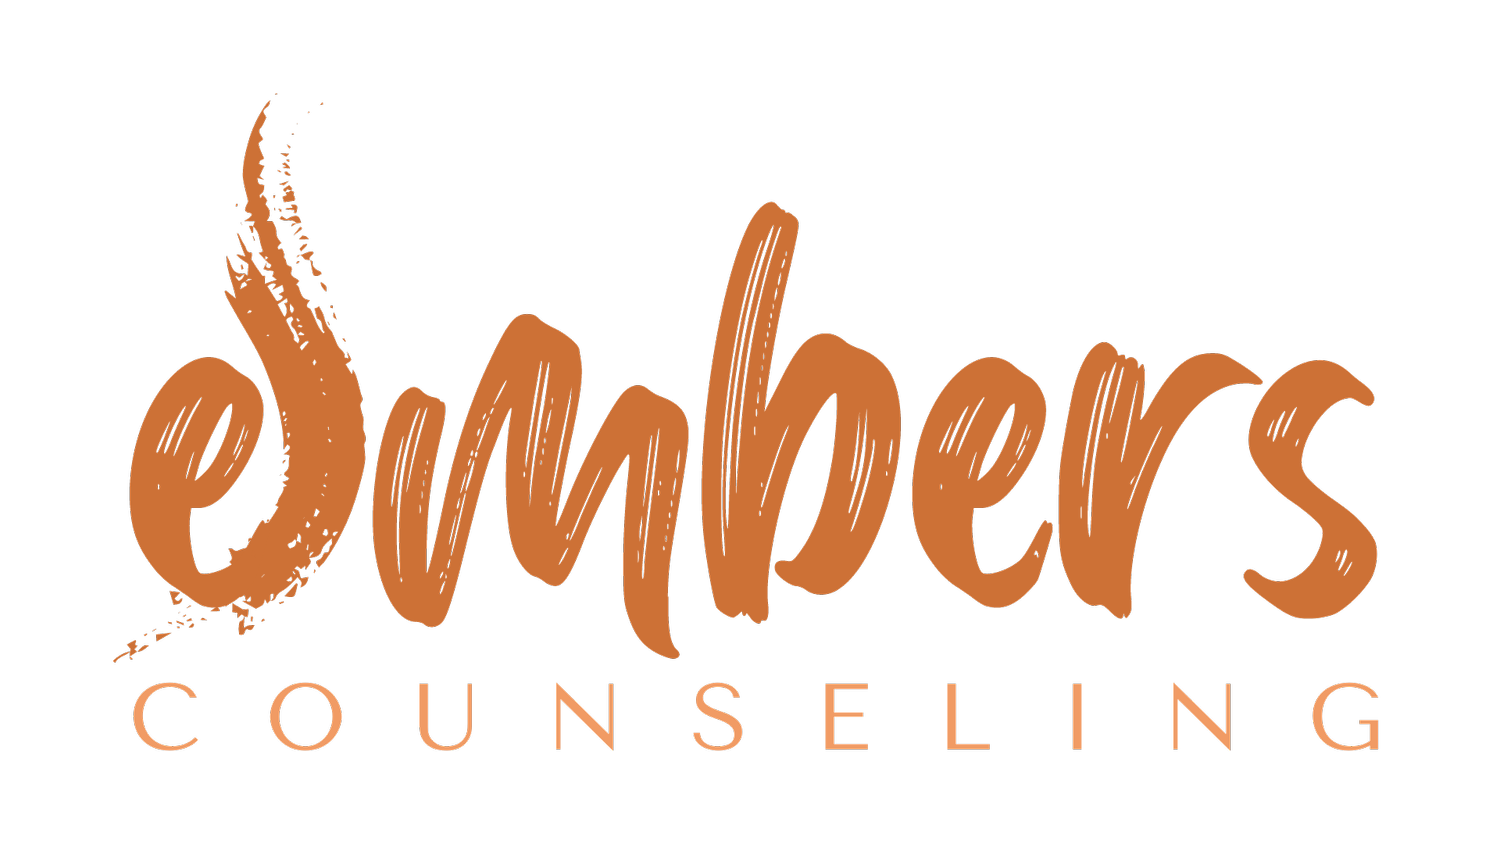 Embers Counseling